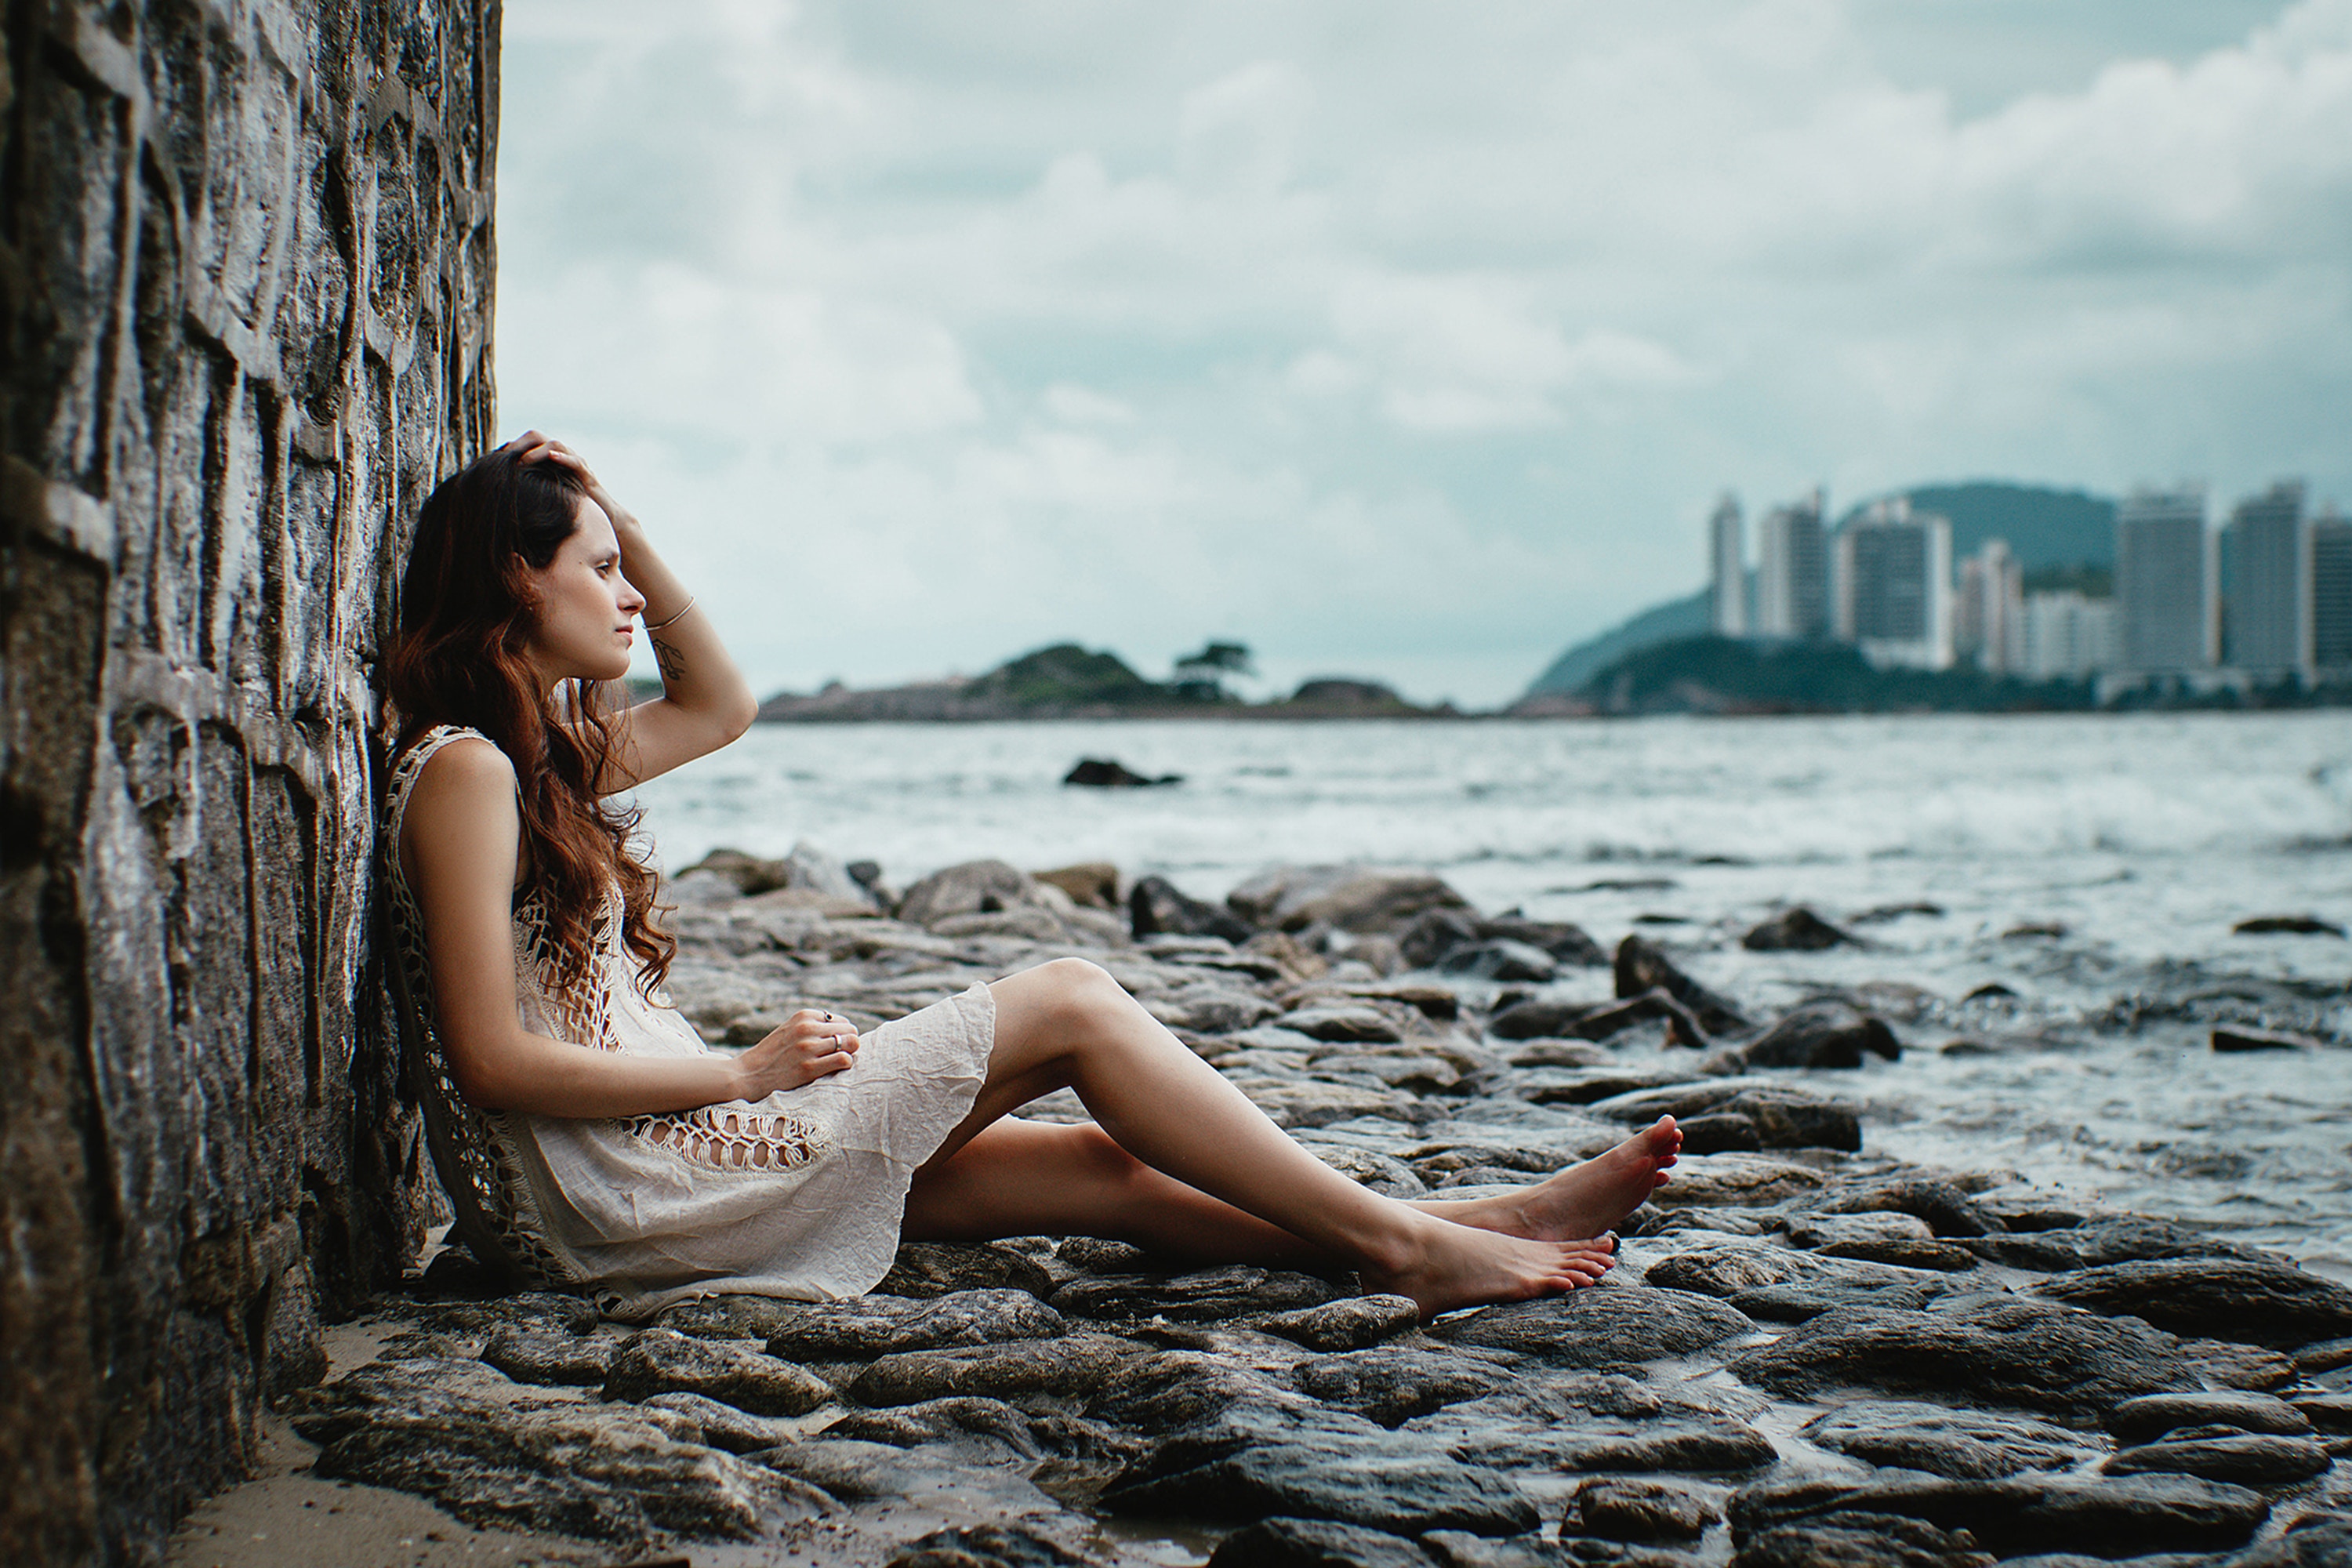 A highly sensitive woman sits by the ocean trying to deal with negative emotions.